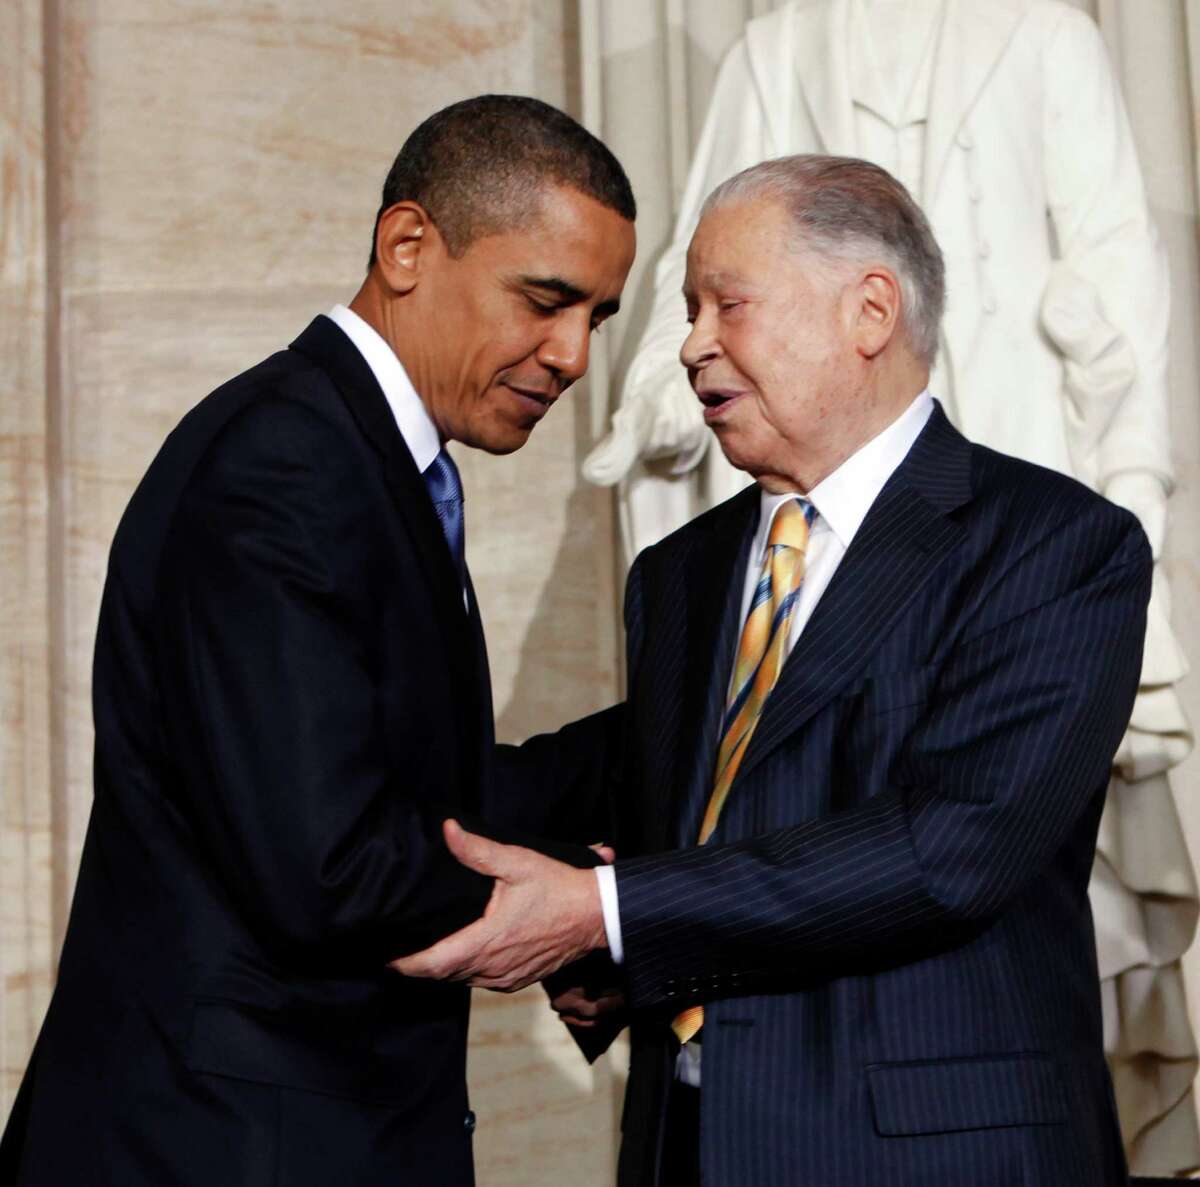 File-This Oct. 28, 2009, file photo shows President Barack Obama greeting former Massachusetts Sen. Edward Brooke in the Rotunda on Capitol Hill in Washington, during a ceremony where Brooke received the Congressional Gold Medal. Brooke, the first black to win popular election to the Senate, has died. He was 95. Ralph Neas, a former aide, said Brooke died Saturday, Jan. 3, 2015, of natural causes at his Coral Gables, Fla, home. (AP Photo/Gerald Herbert, File)